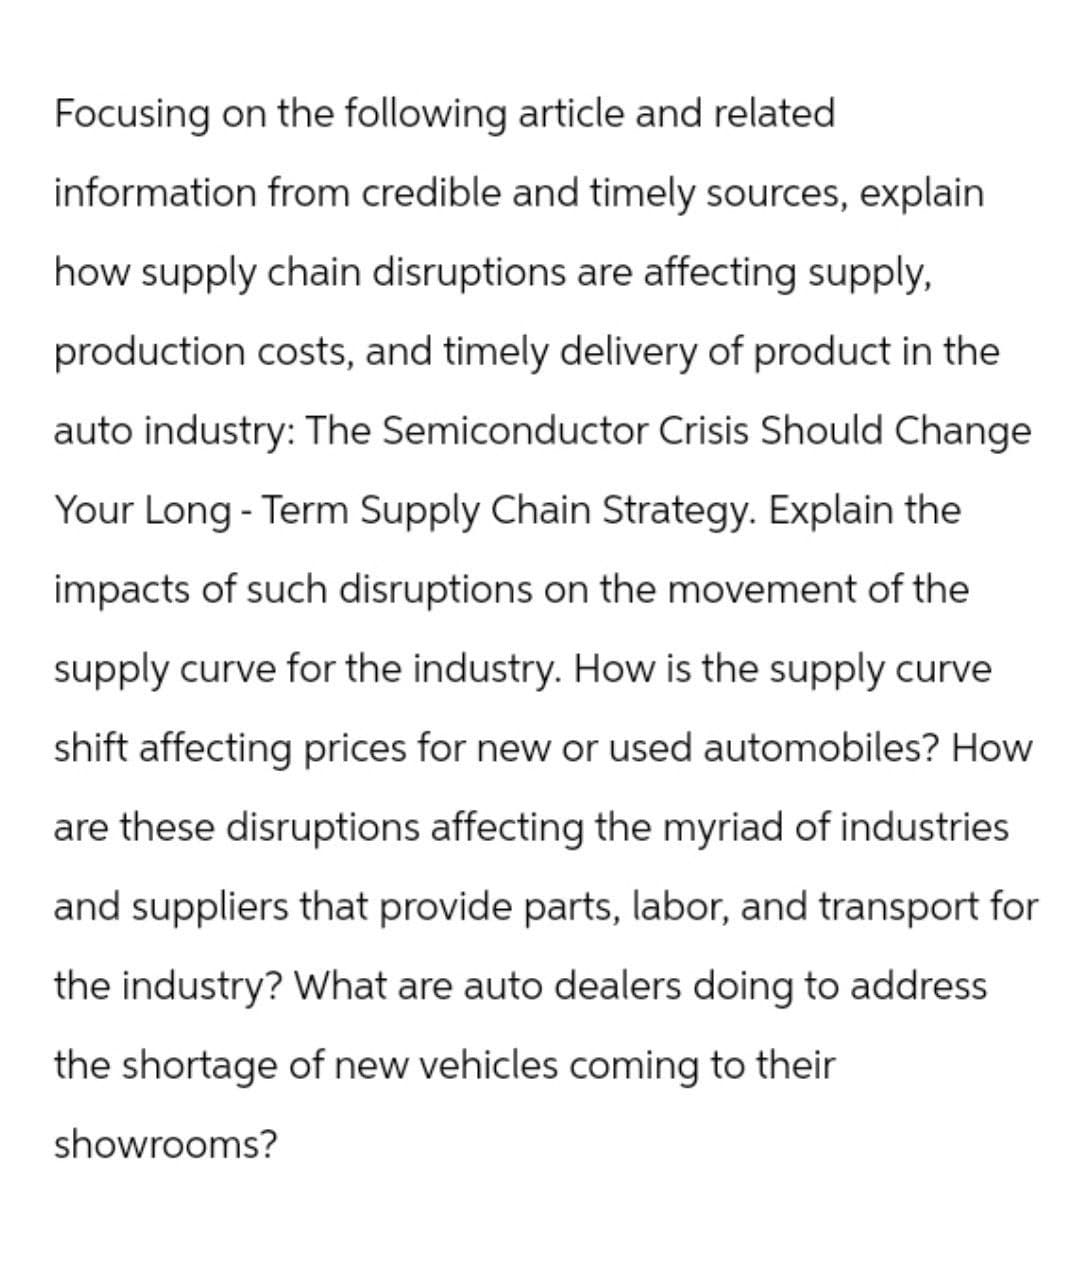 Focusing on the following article and related
information from credible and timely sources, explain
how supply chain disruptions are affecting supply,
production costs, and timely delivery of product in the
auto industry: The Semiconductor Crisis Should Change
Your Long-Term Supply Chain Strategy. Explain the
impacts of such disruptions on the movement of the
supply curve for the industry. How is the supply curve
shift affecting prices for new or used automobiles? How
are these disruptions affecting the myriad of industries
and suppliers that provide parts, labor, and transport for
the industry? What are auto dealers doing to address
the shortage of new vehicles coming to their
showrooms?